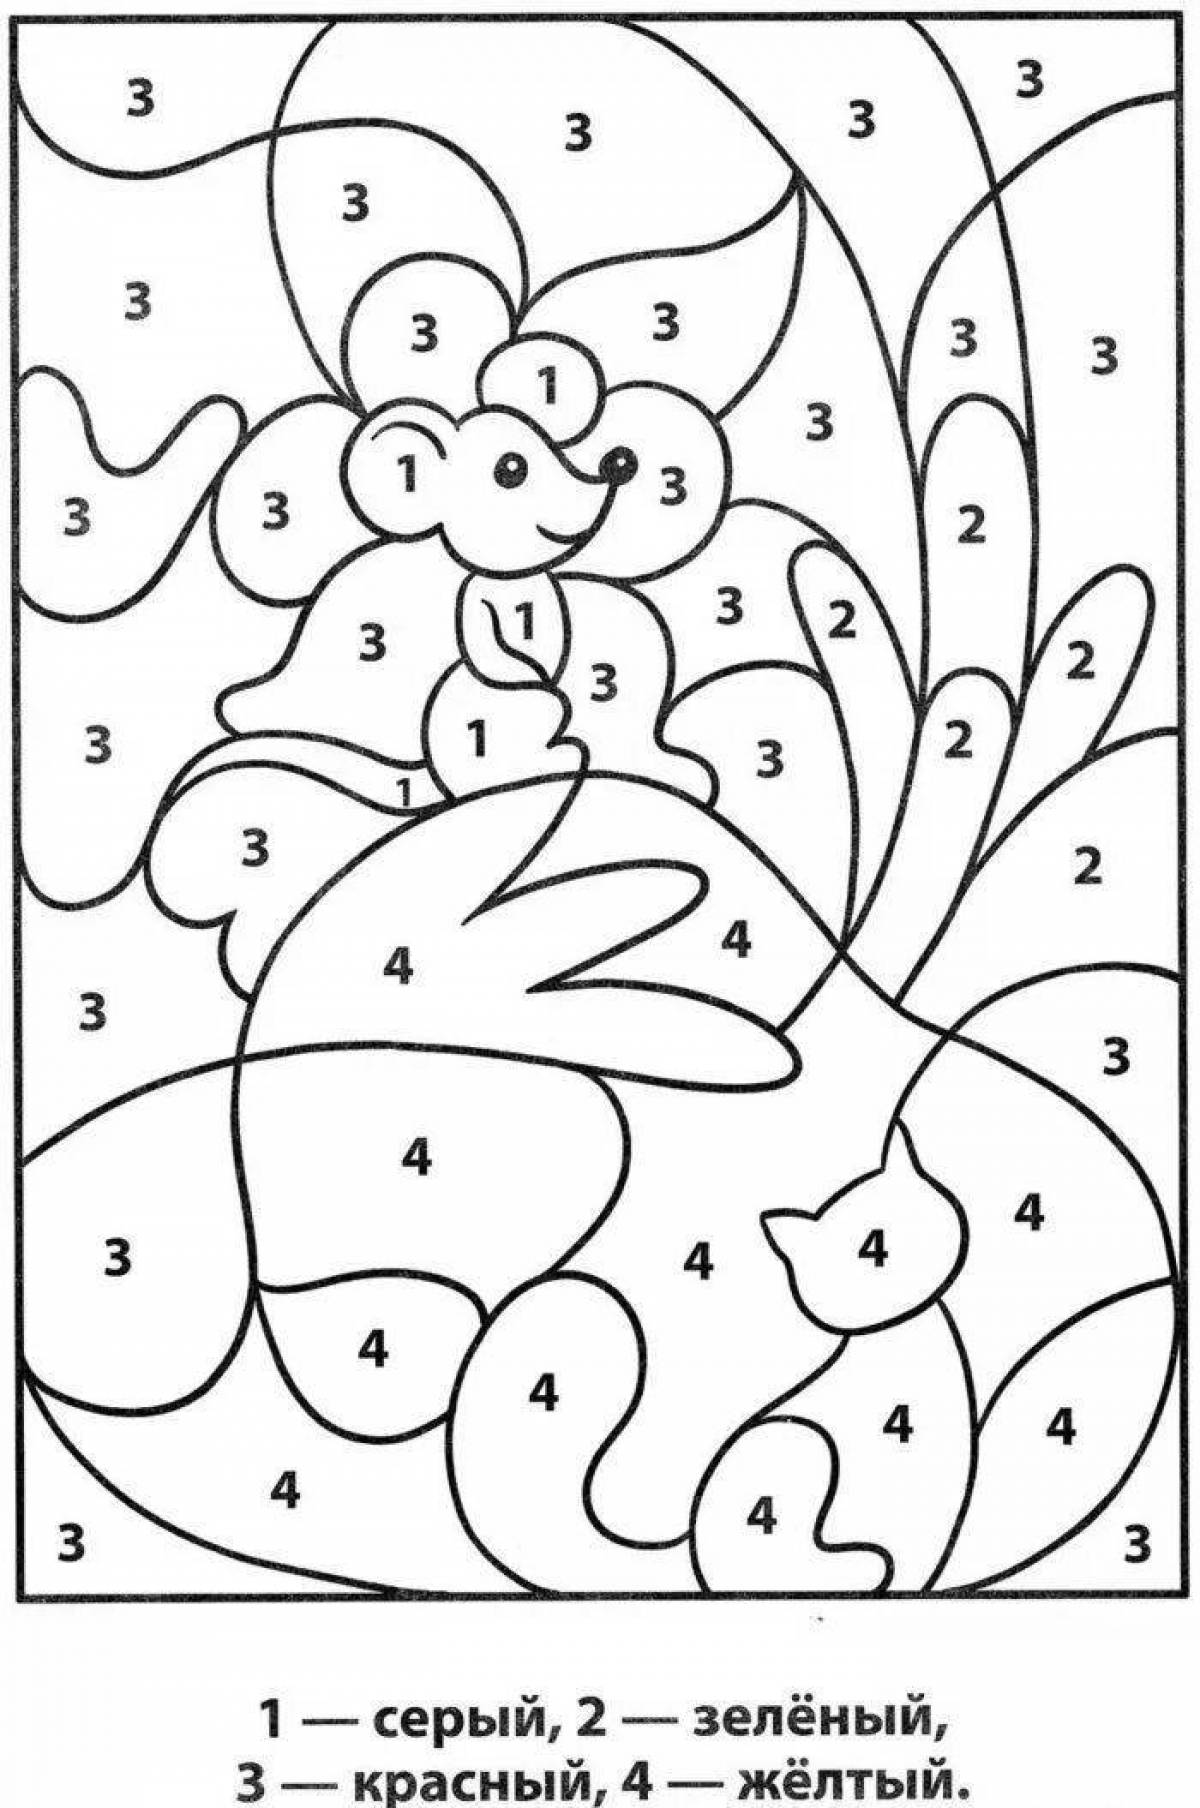 Vibrant number coloring page for kids